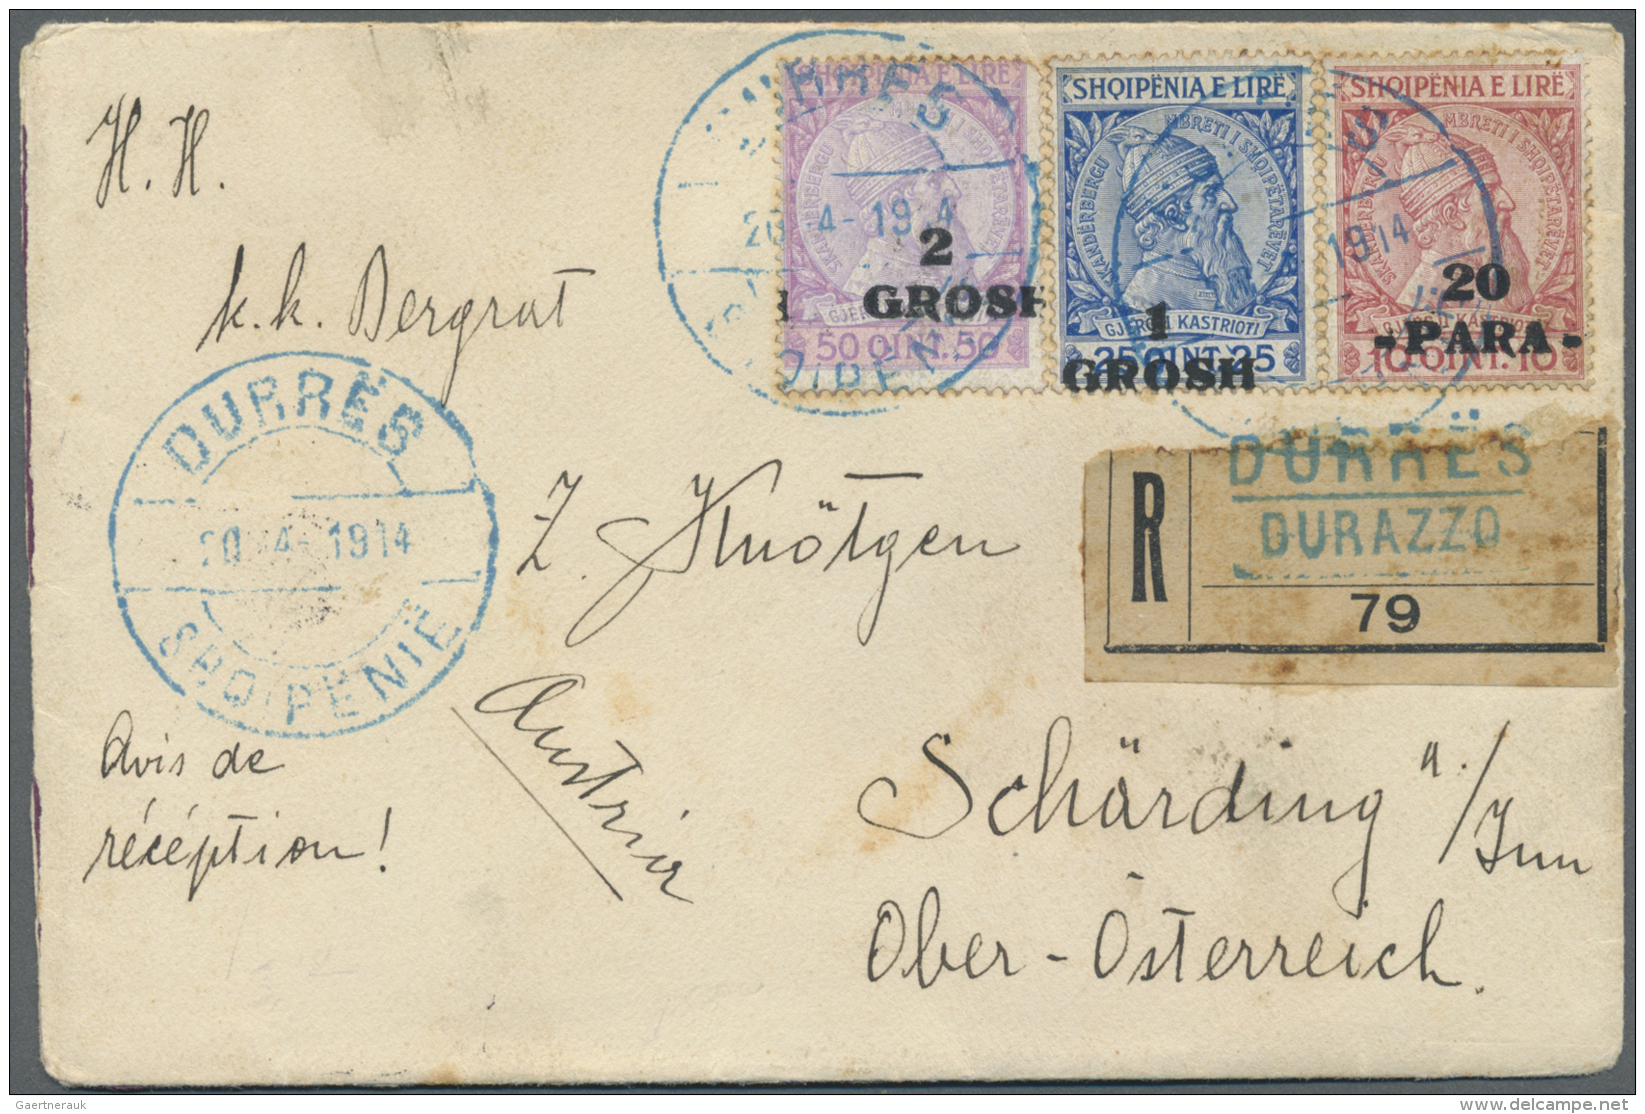 Albanien: 1914, 2 Gr./50 Q., 1 Gr./25 Q. And 20 P./10 Q. Tied Blue "DURRES 20.4.1914" To Small Envelope By Registered-AR - Albanië